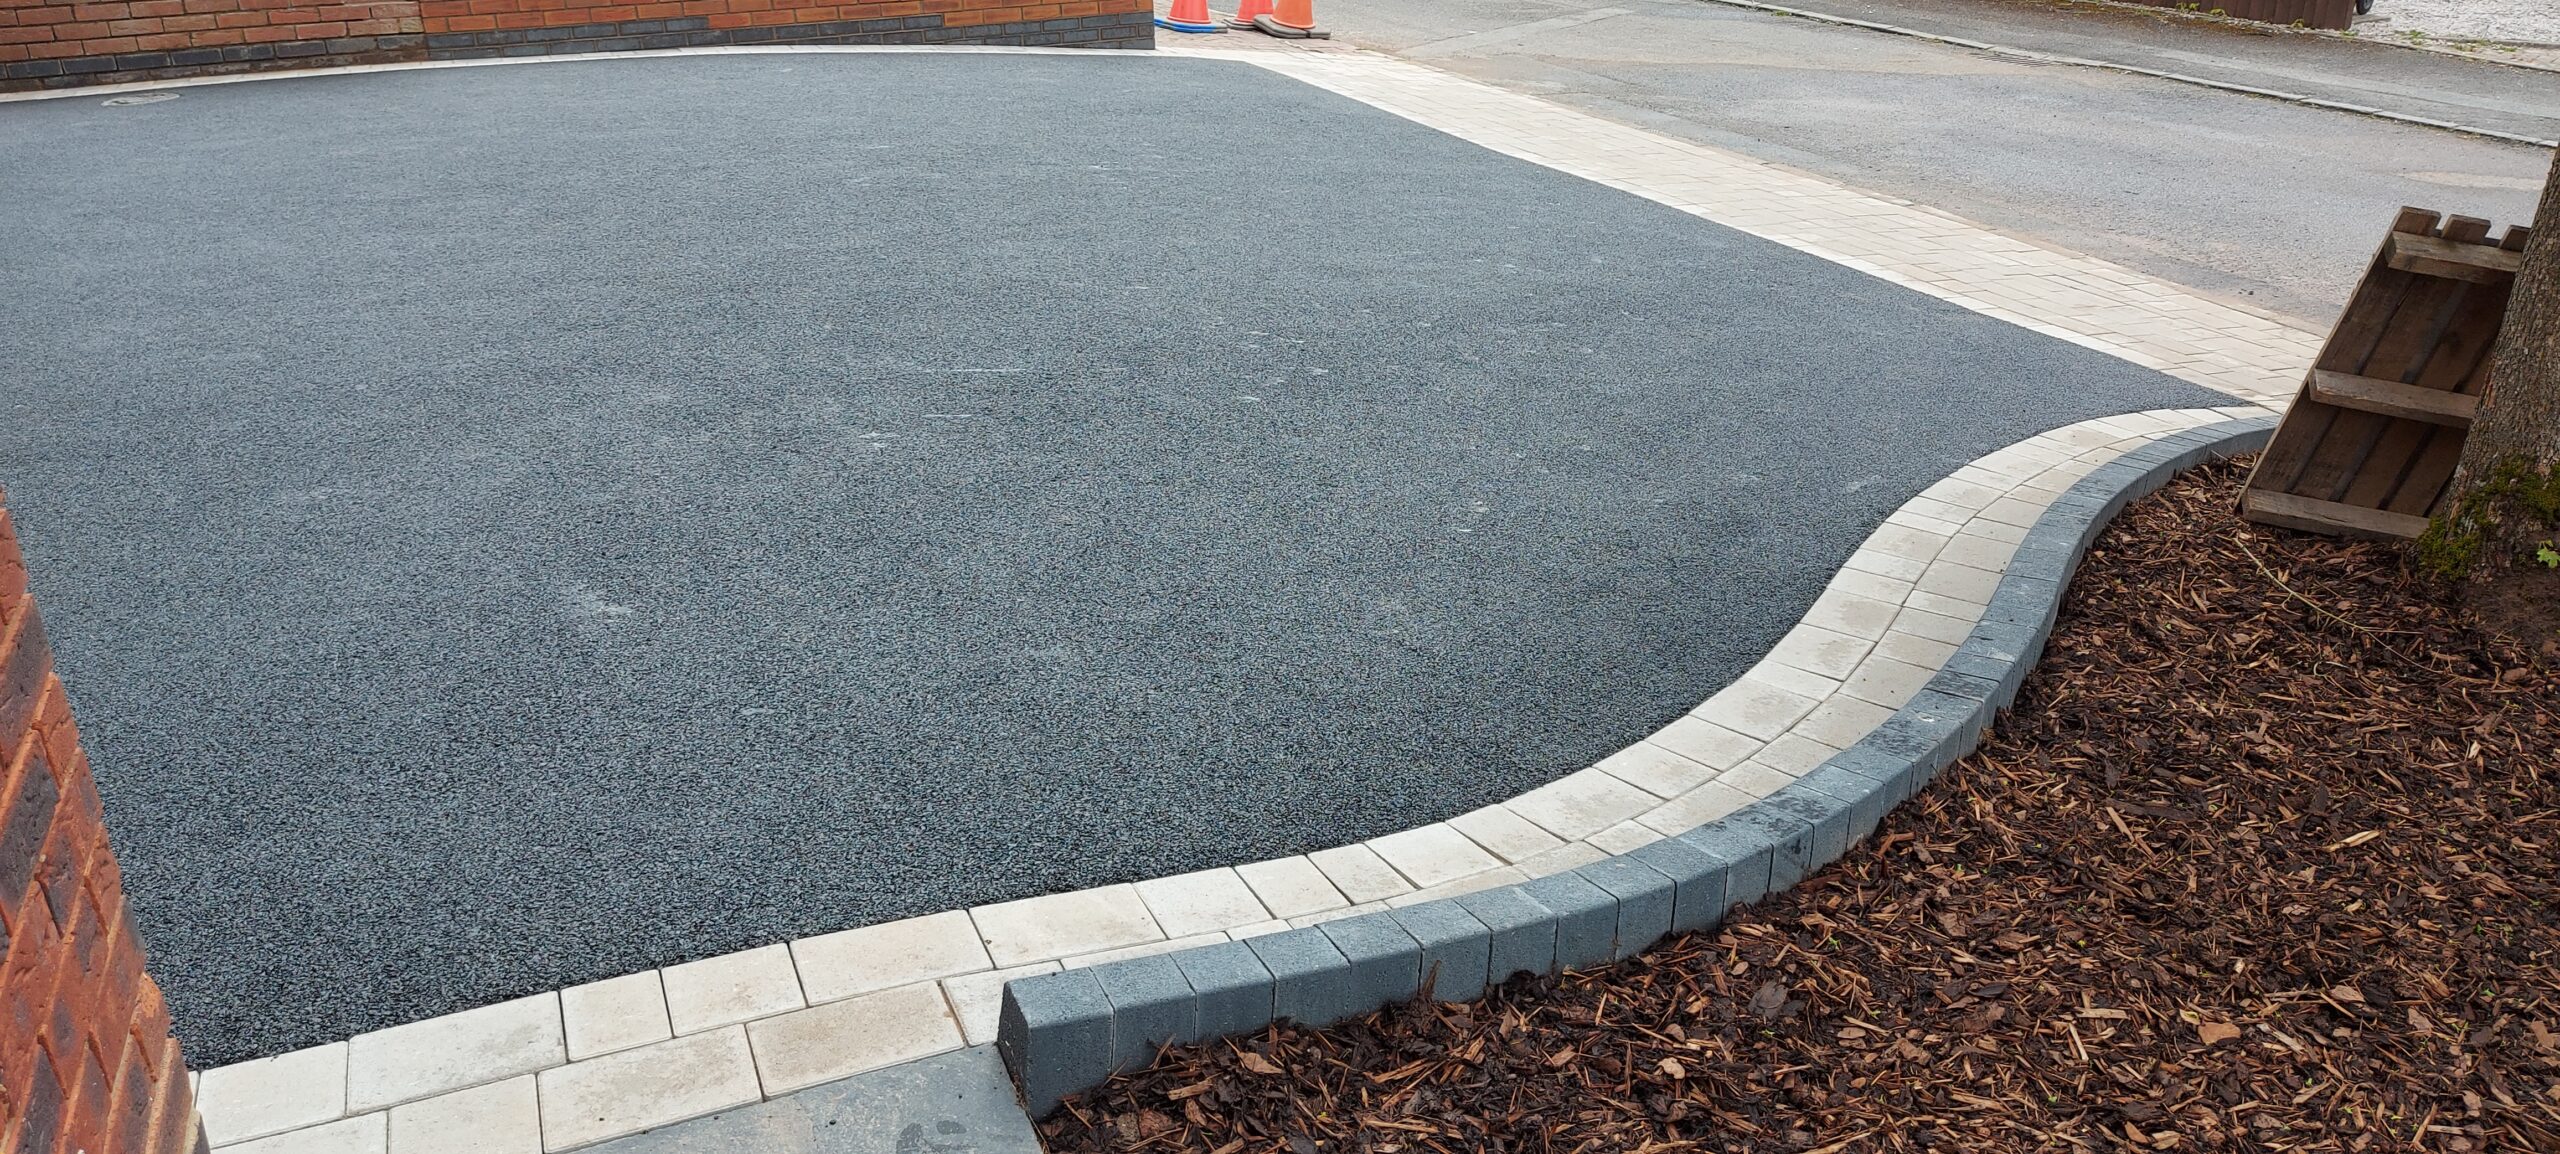 KL Kerbs with Block paving soldier border and Tarmac